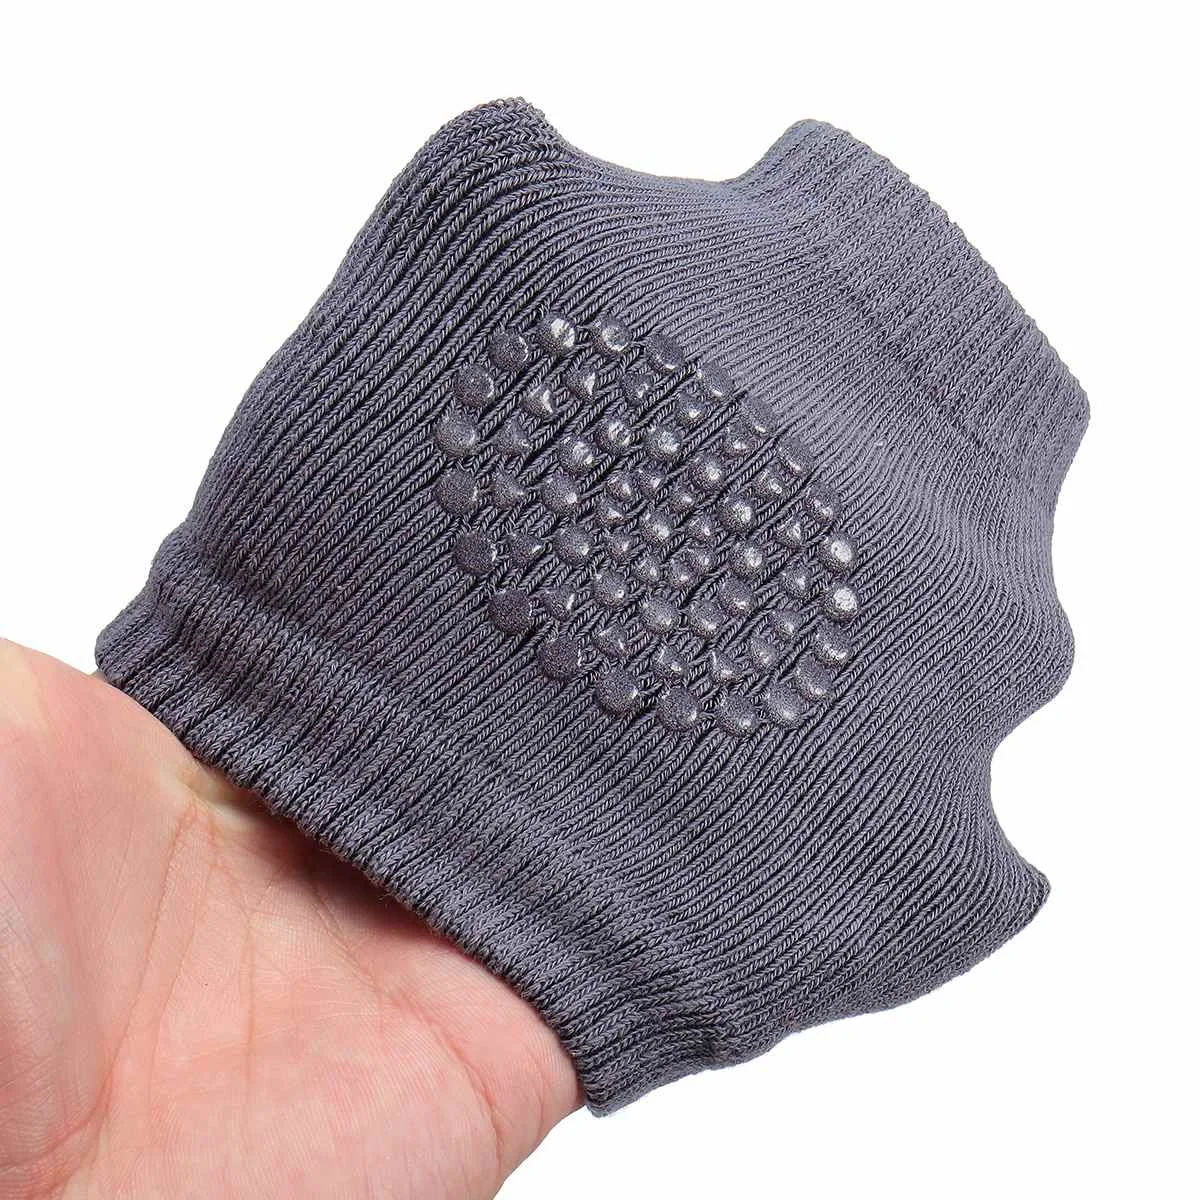 1 Pair Cotton Baby Knee Pad Child Safety Crawling Anti Slip Soft Cushion Toddlers Leg Warmer Breathable Knee Support Protector